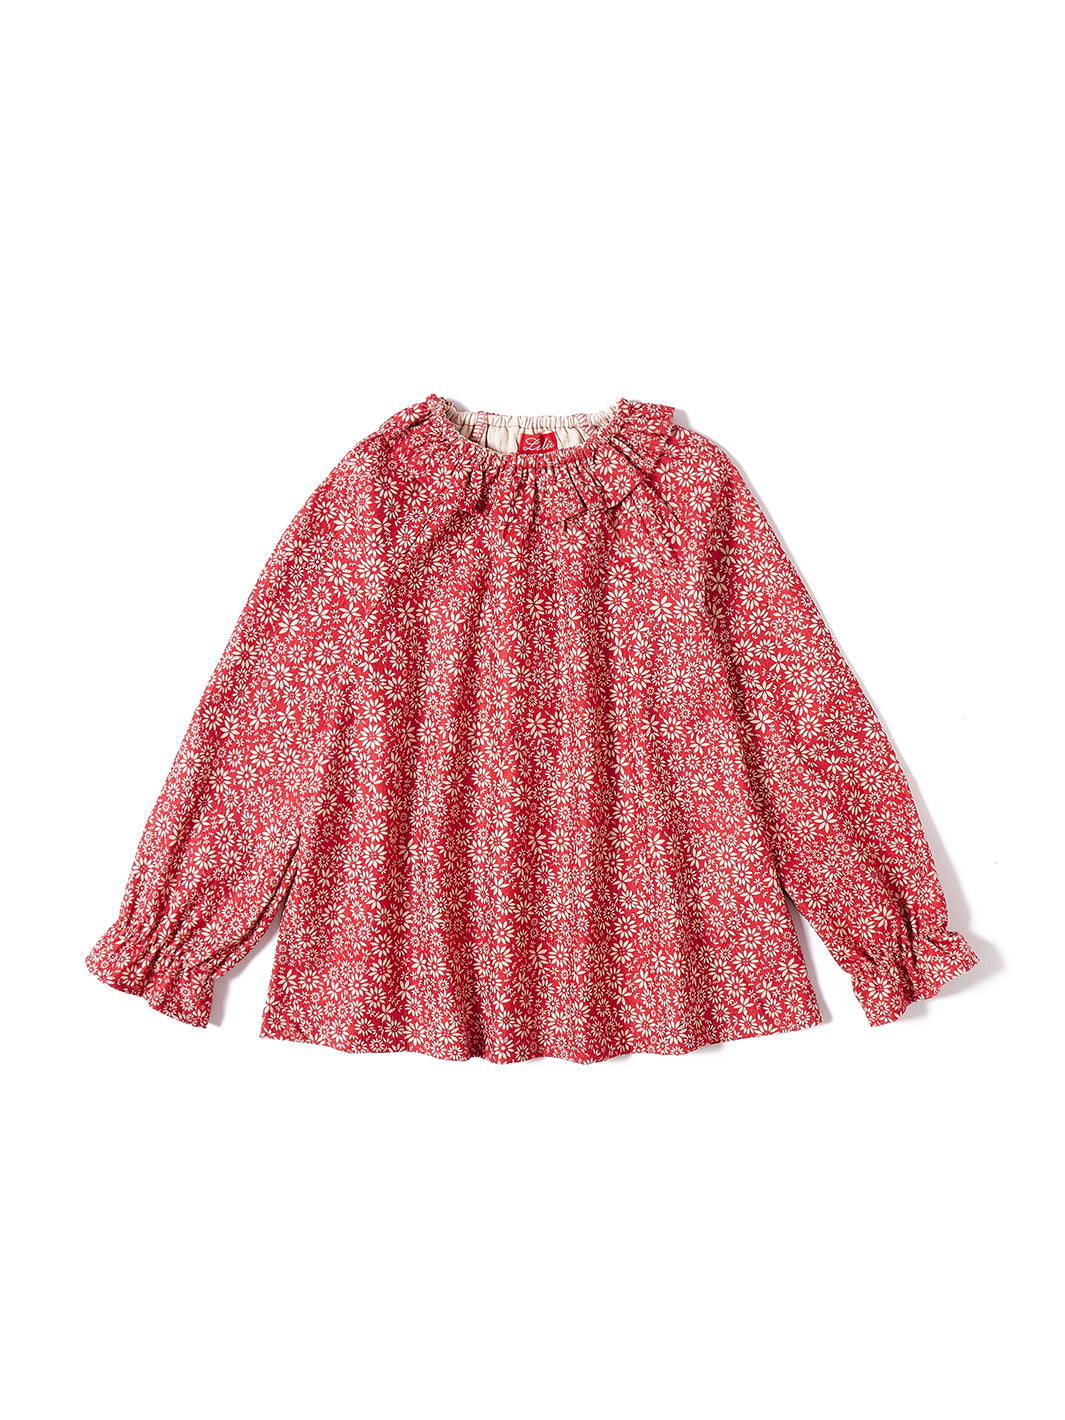 Daisy Floral Corduroy Shirt - Red